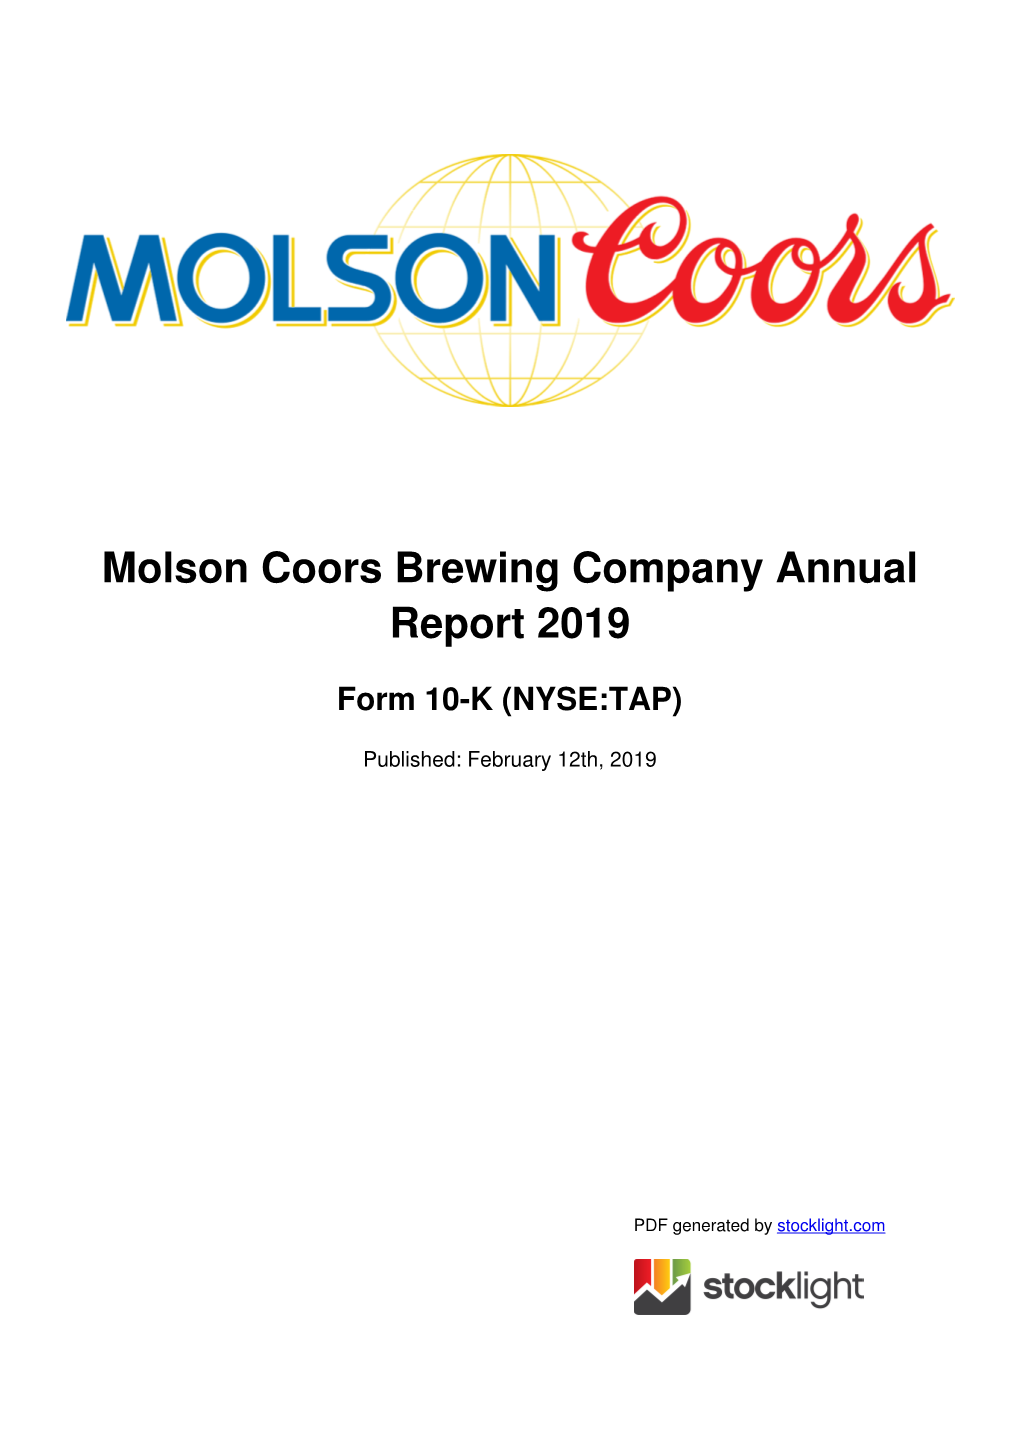 Molson Coors Brewing Company Annual Report 2019